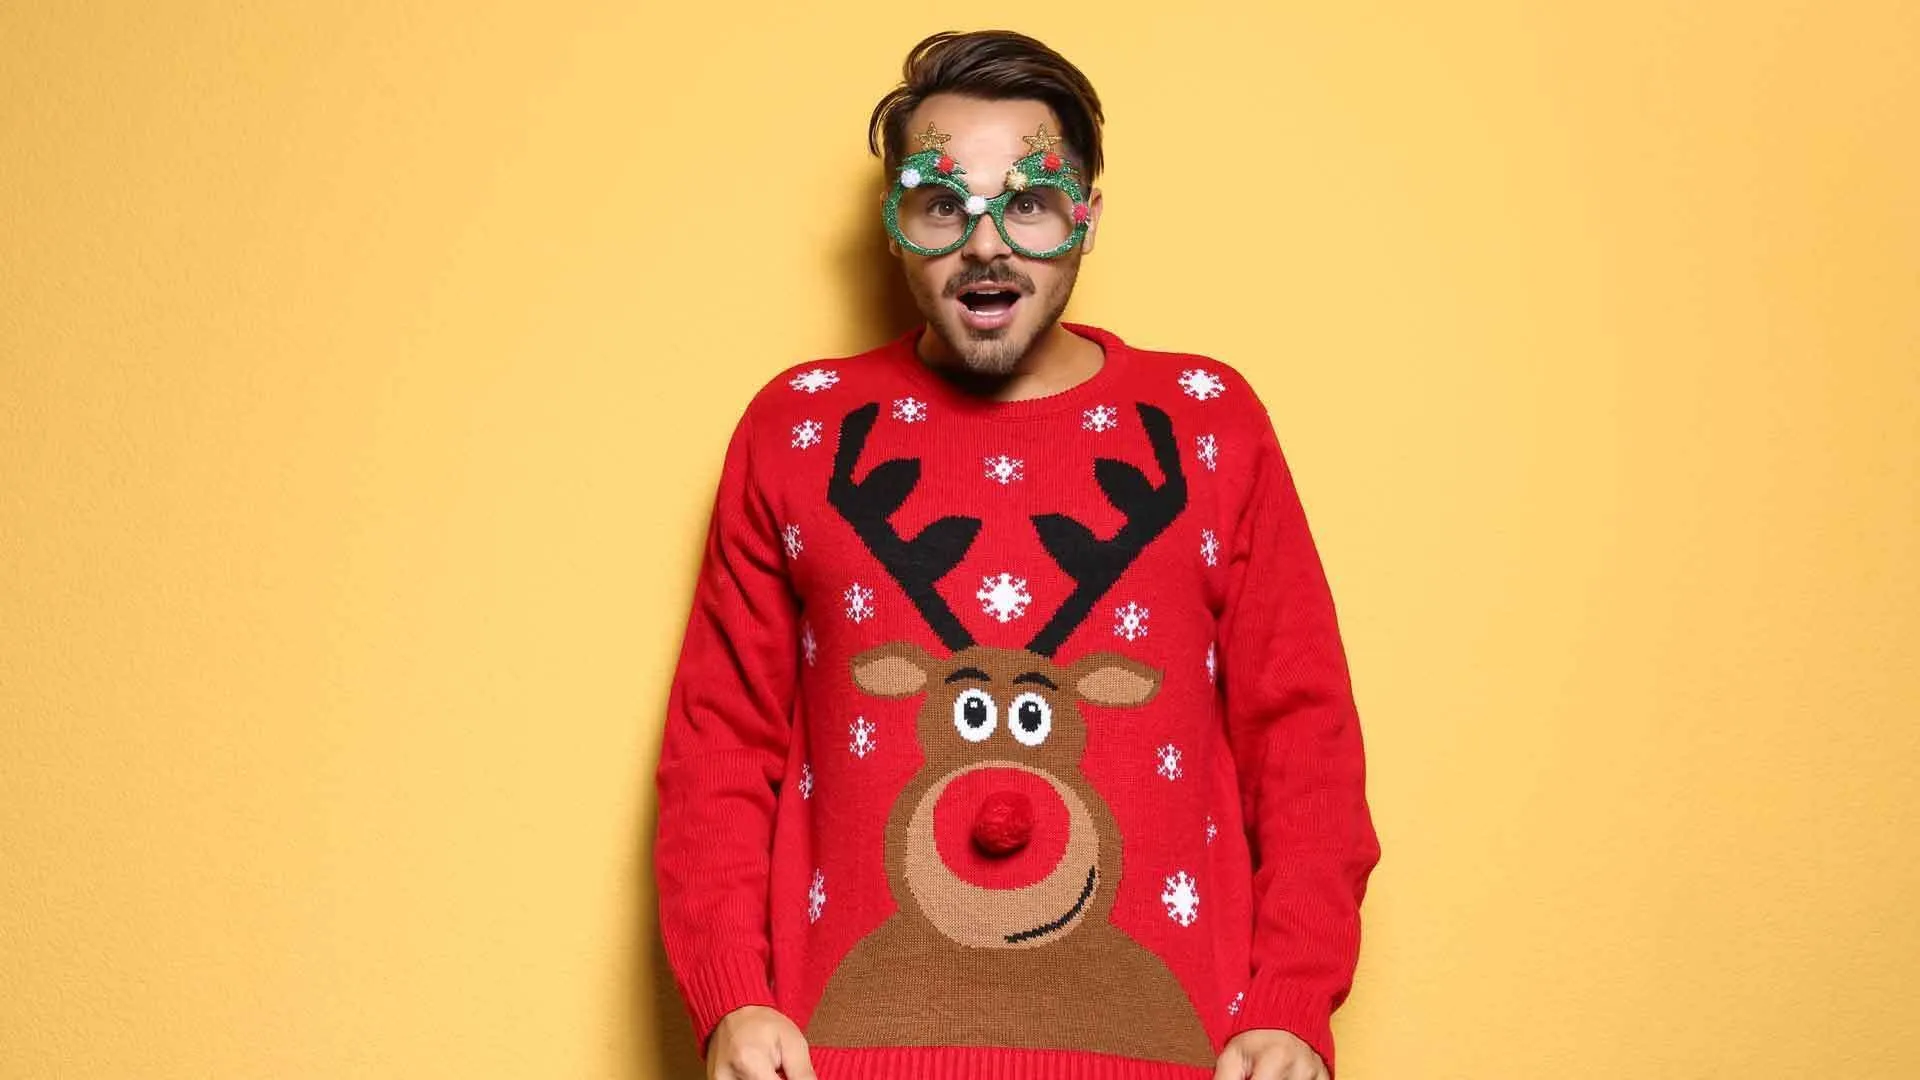 Ugly Christmas sweaters: why we wear ugly sweaters at Christmas